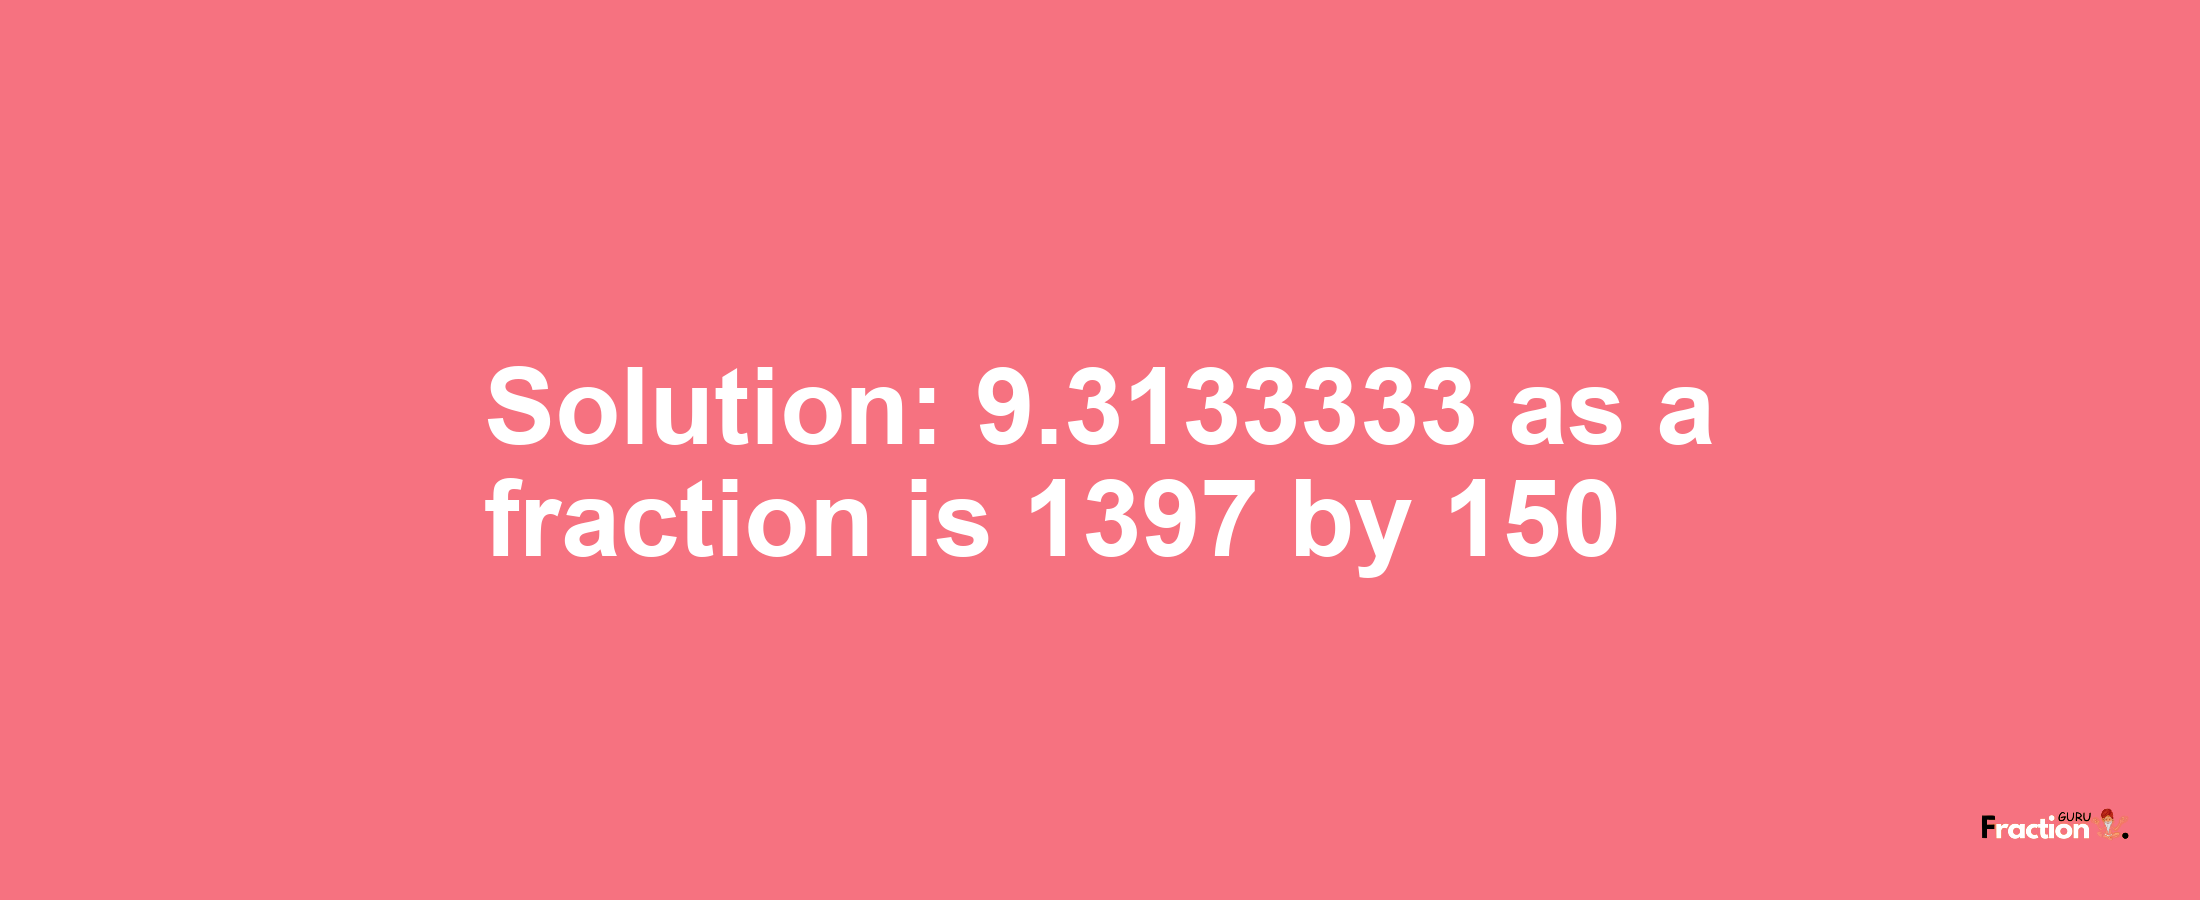 Solution:9.3133333 as a fraction is 1397/150